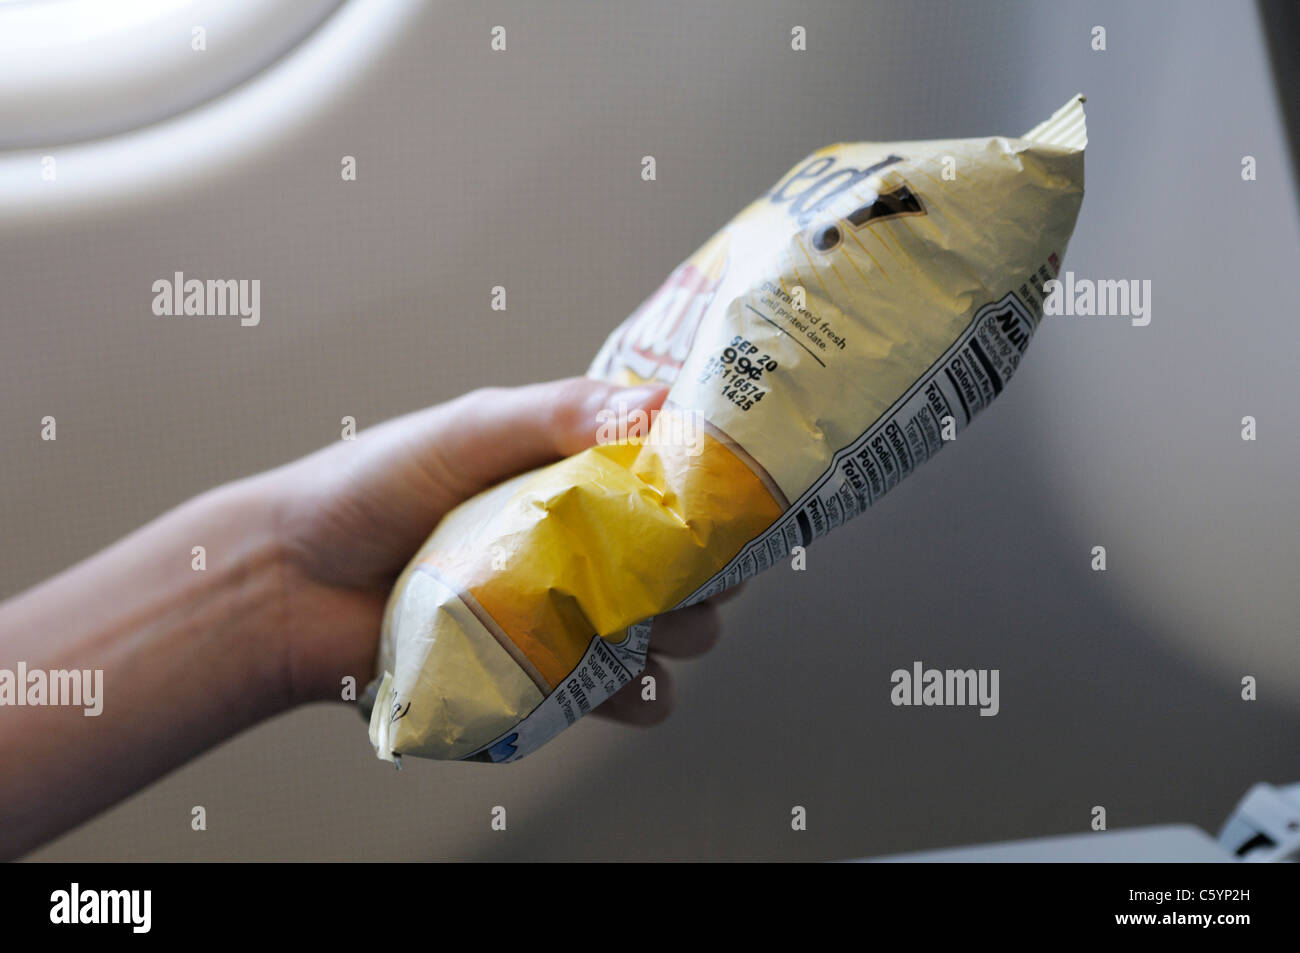 Chip bag on airplane at sea level showing effects of higher atmospheric pressure than in image # C5YP2N Stock Photo